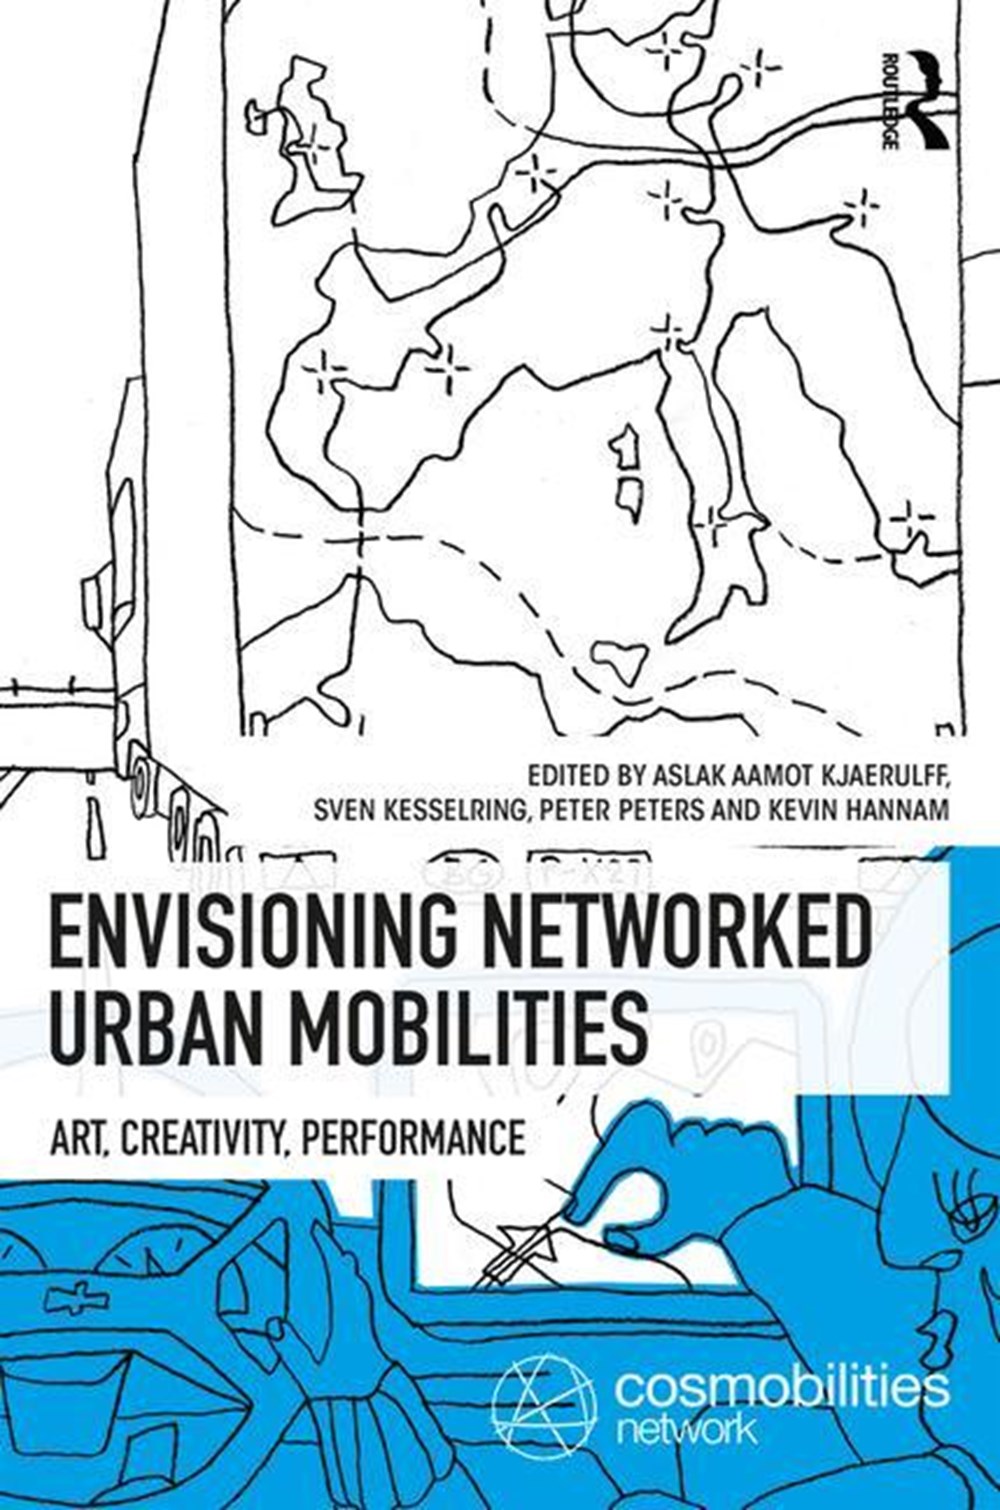 Envisioning Networked Urban Mobilities: Art, Performances, Impacts